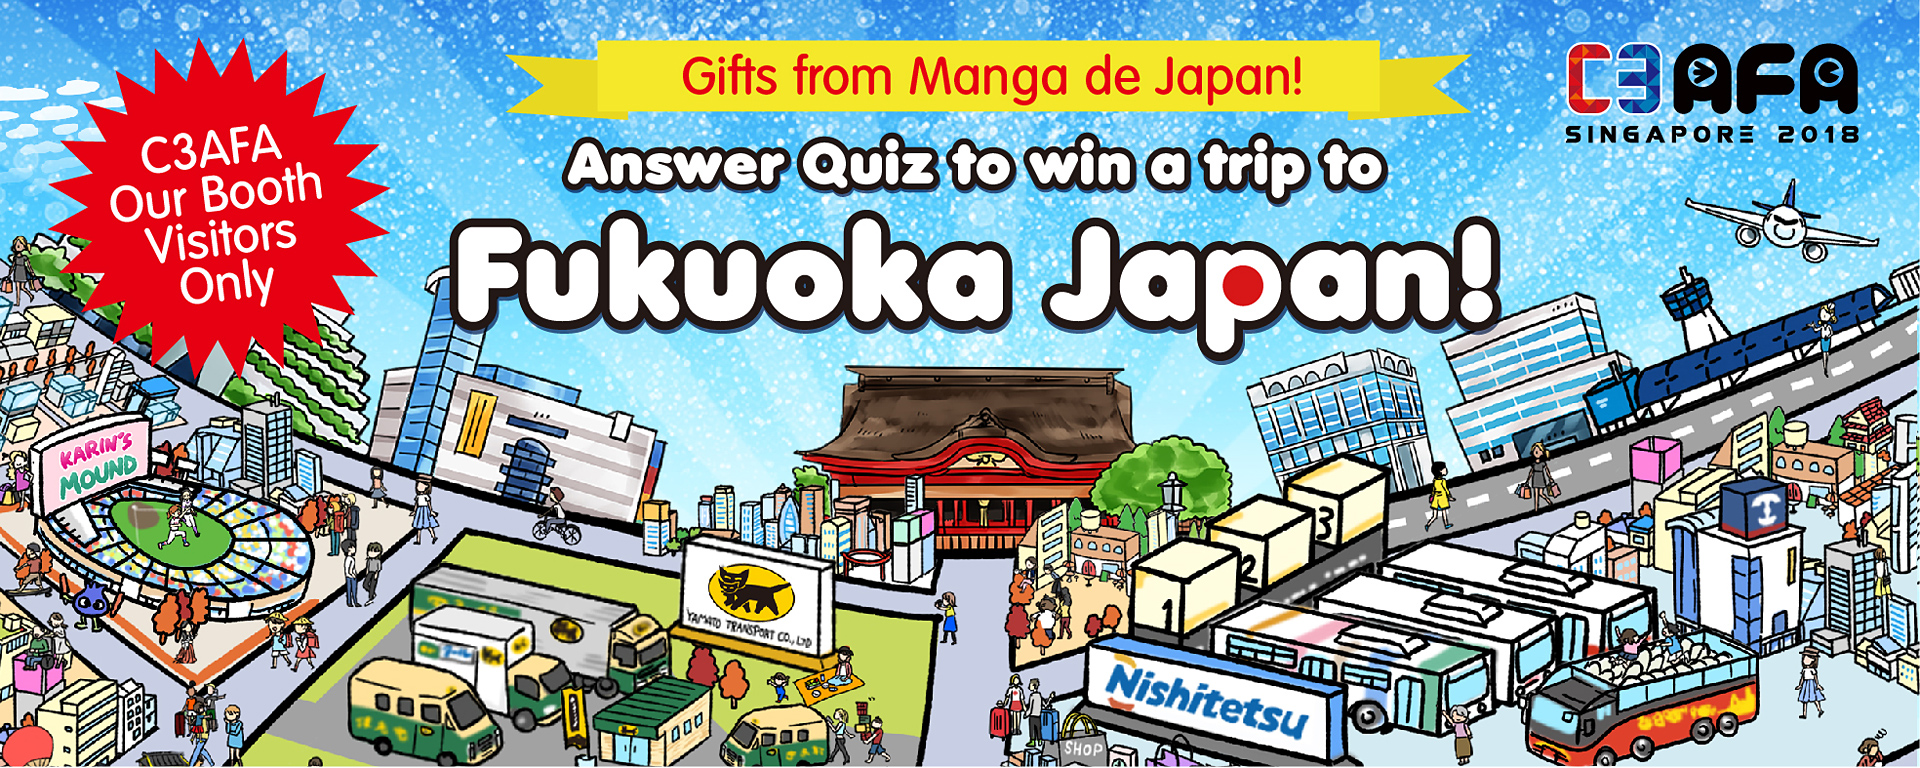 Don't miss a big chance to win a pair of air tickets to Fukuoka, and Nishitetsu Hotel tickets!